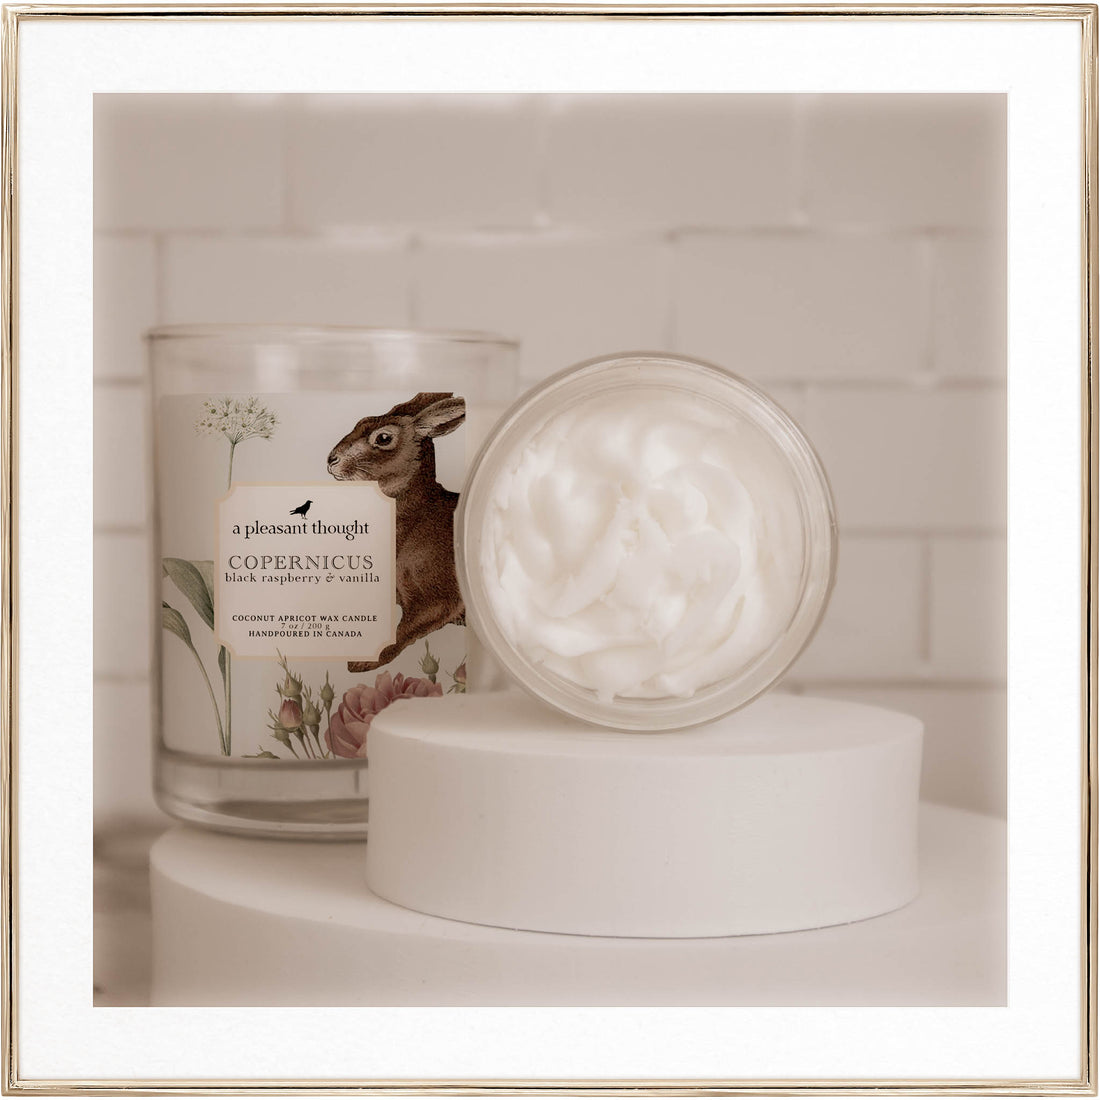  copernicus home fragrance a pleasant thought